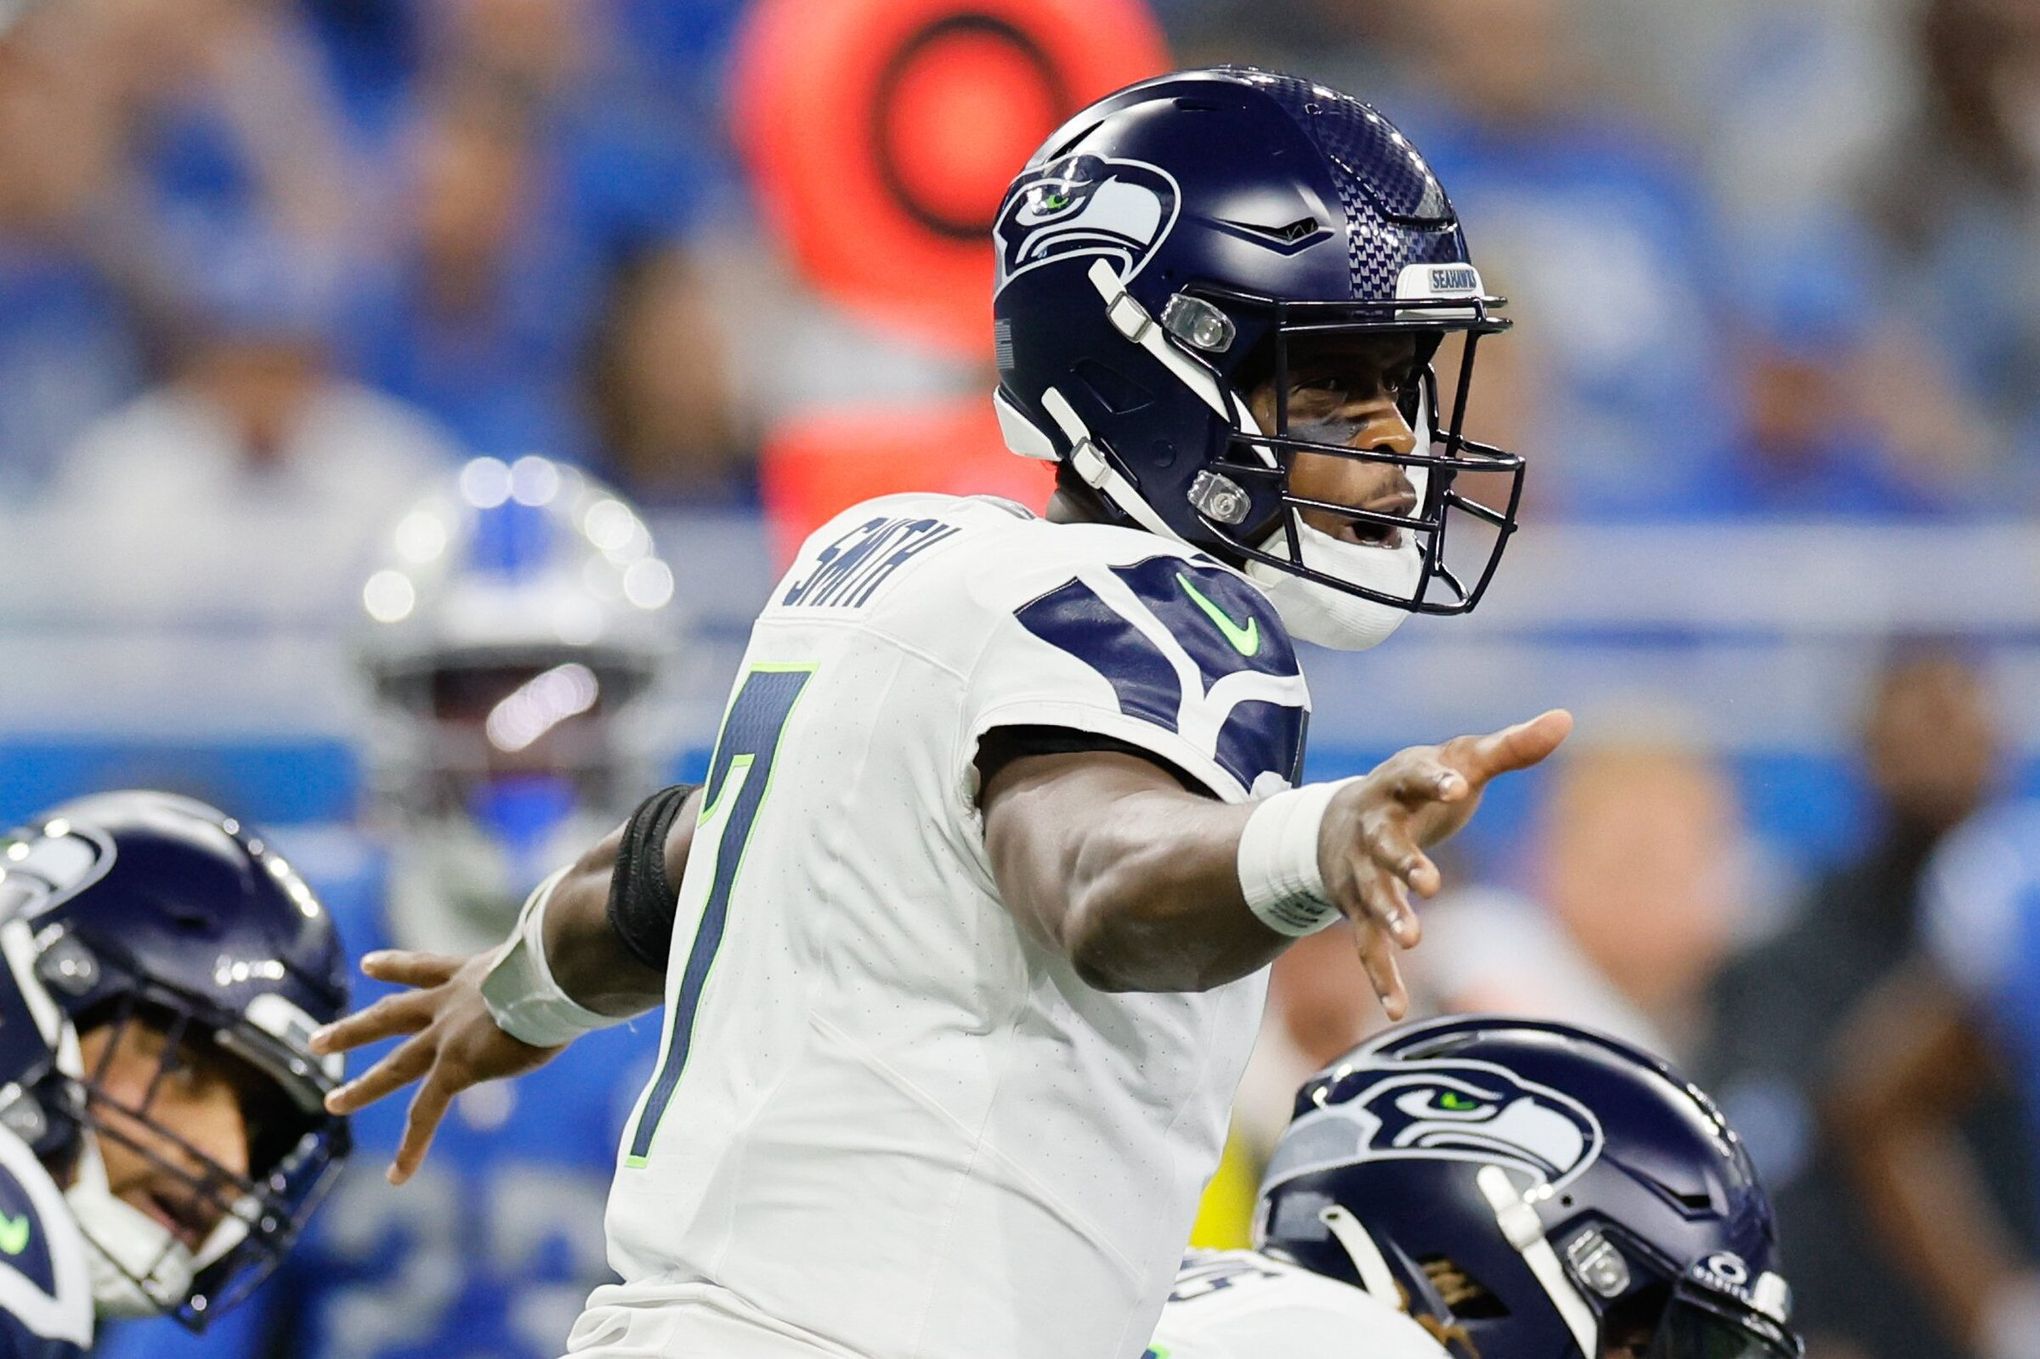 Where Seahawks stand in NFL power rankings after Week 2